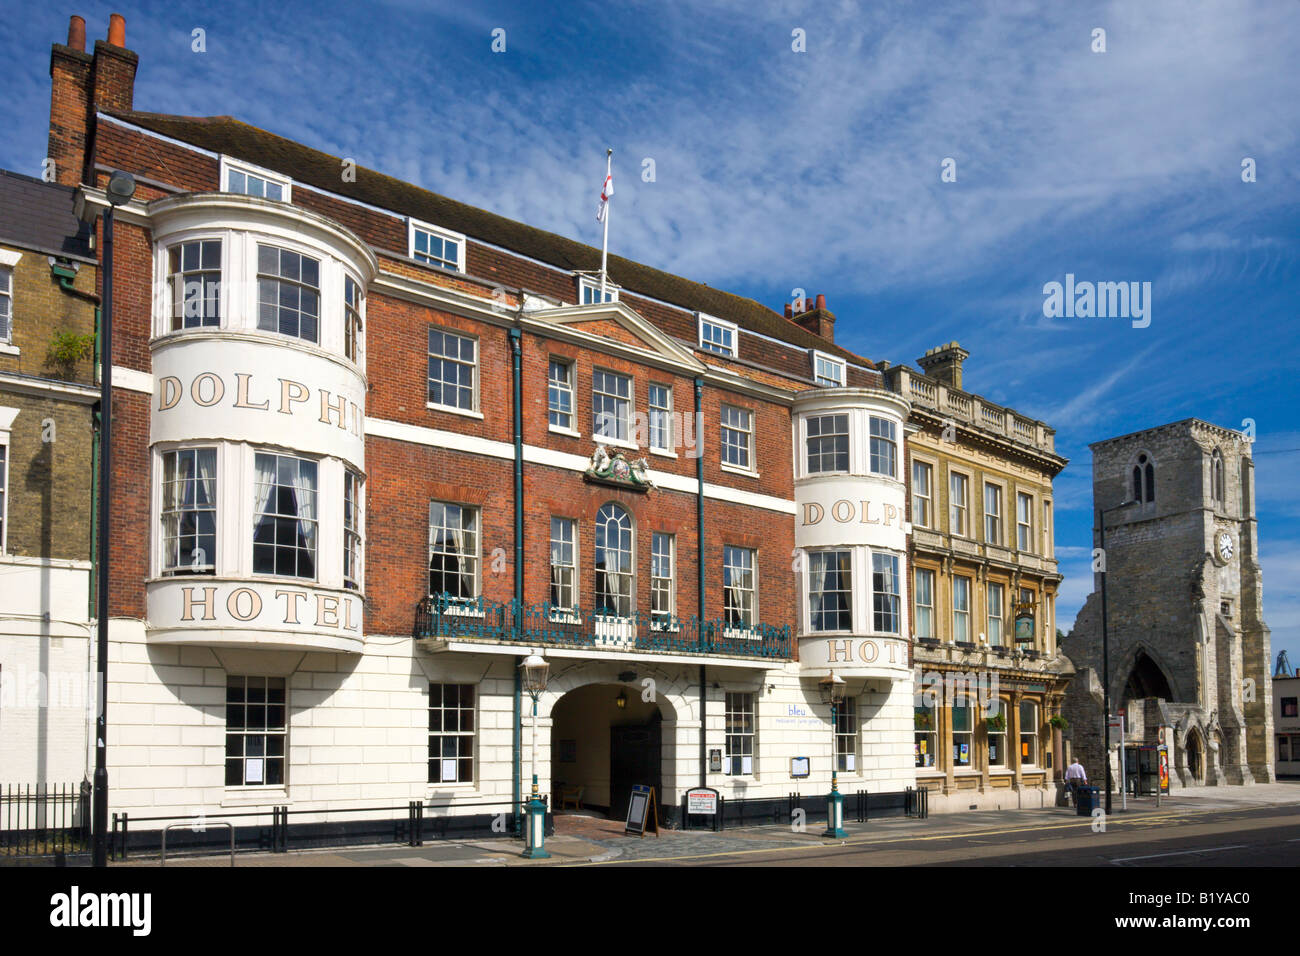 Historic Dolphin Hotel on Southampton High Street next door to the ruined shell of Holy Rood Church Hampshire England Stock Photo